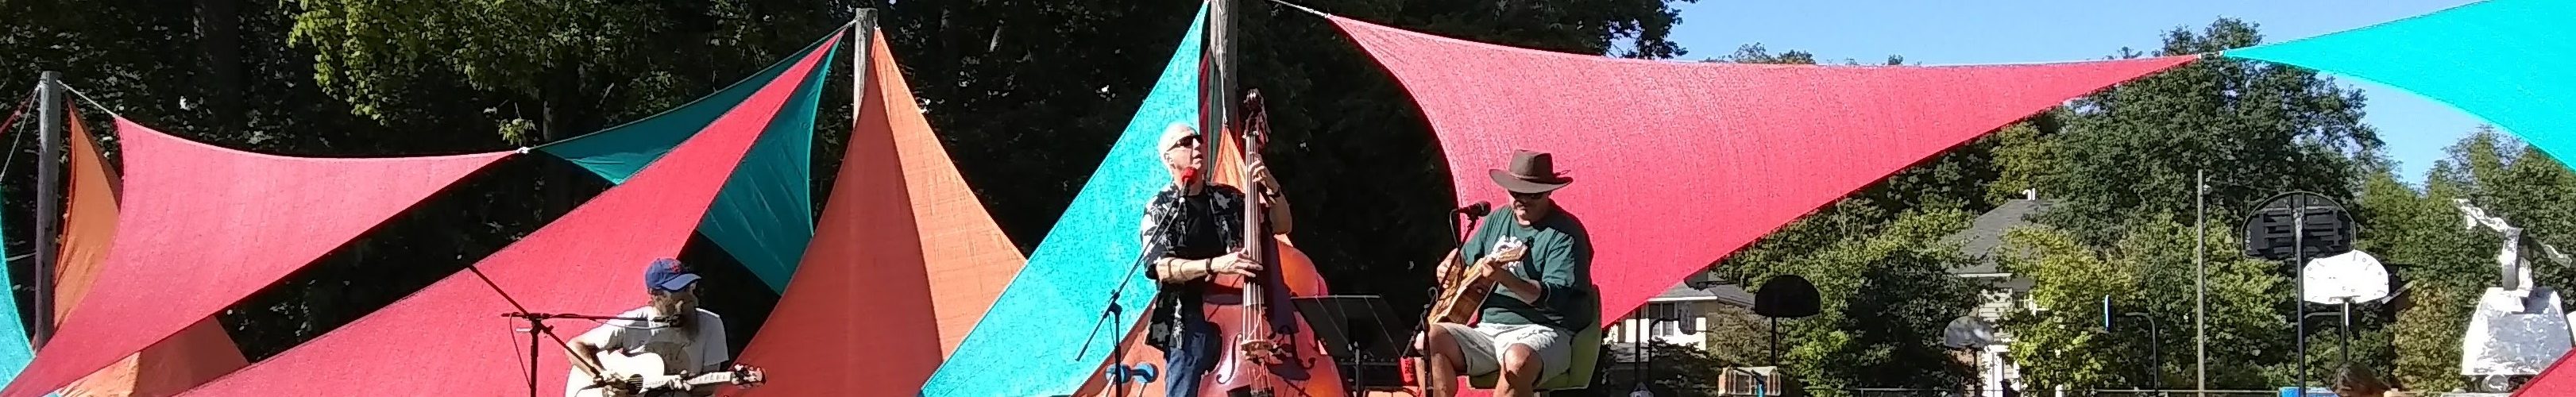 Two guitarists and an upright bass player perform in front of the colorful sails sculpture on a beautiful day.